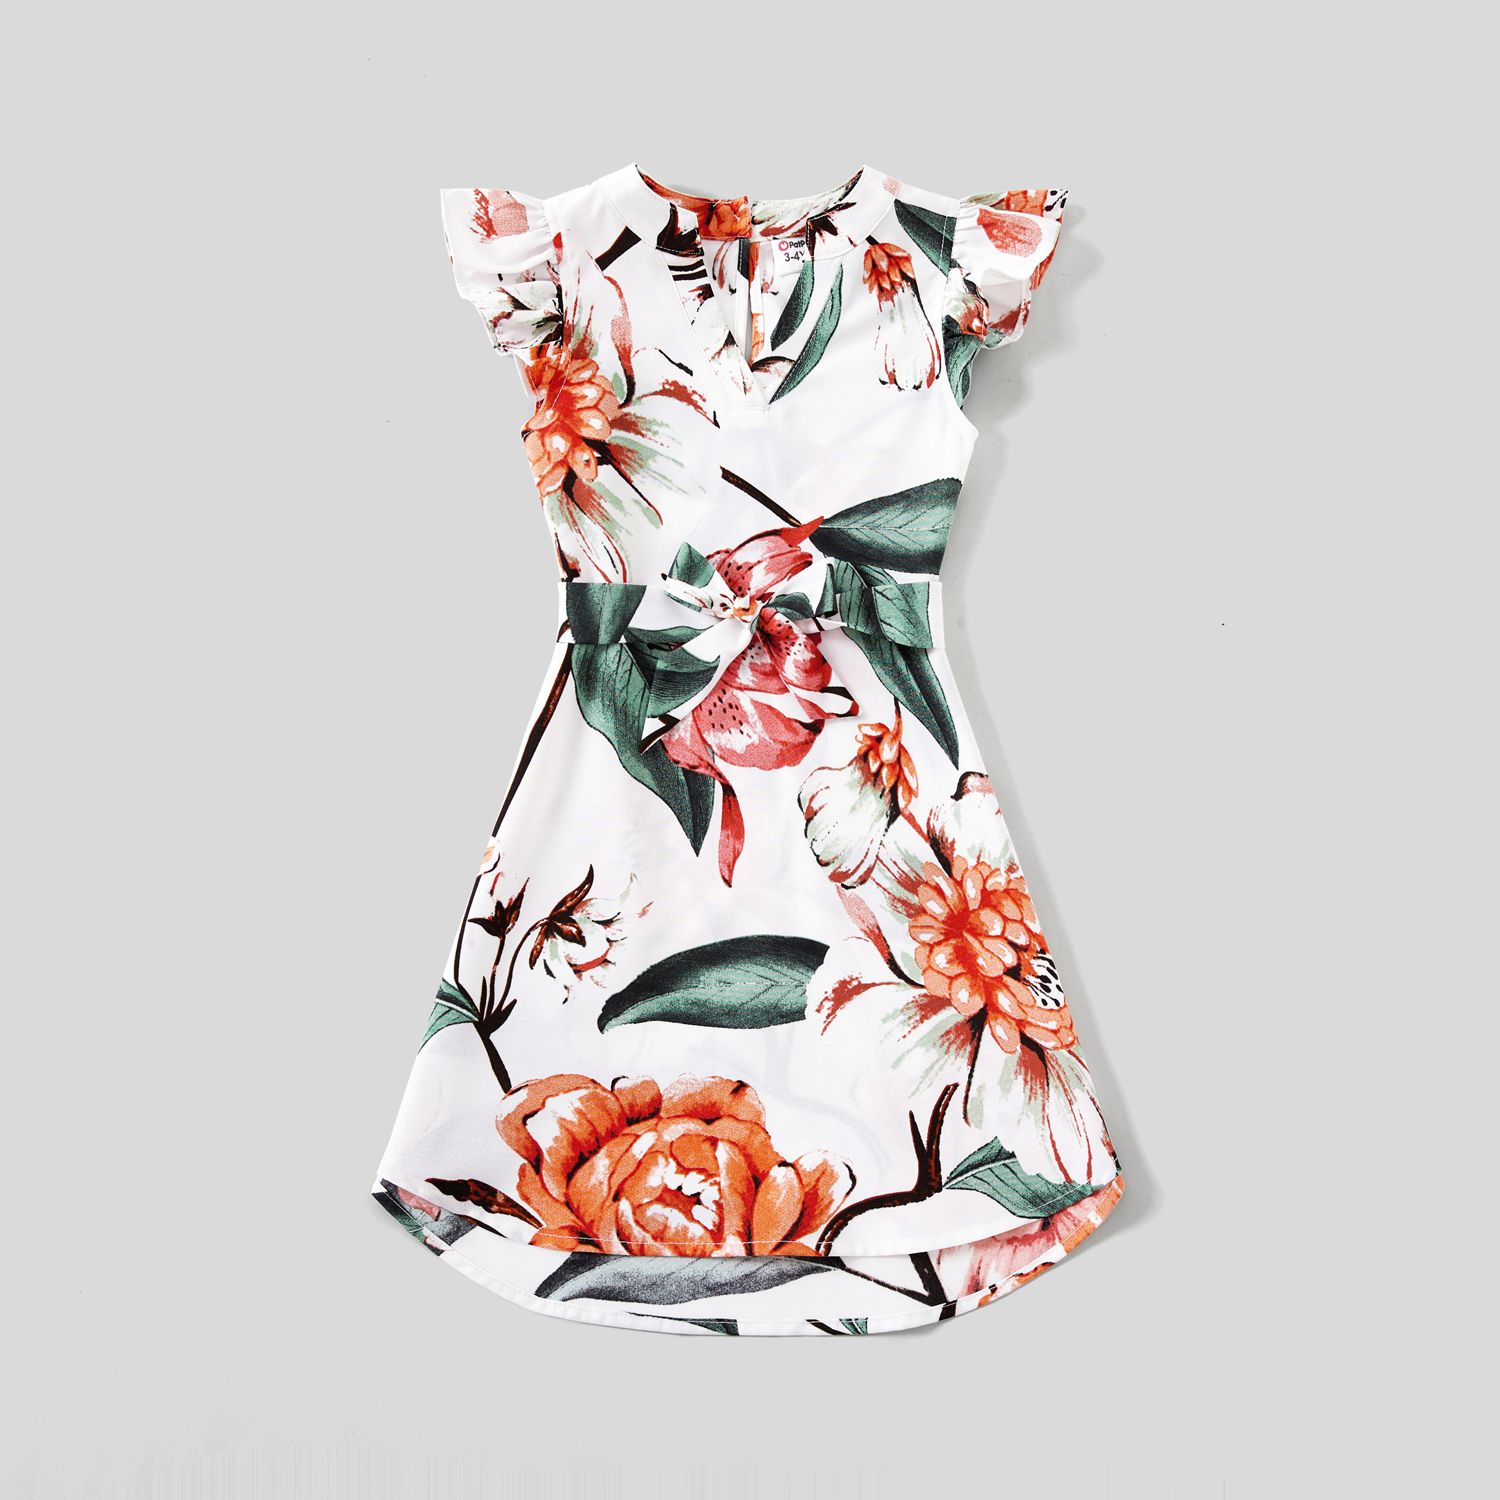 Family  Matching  Flutter-sleeve  Allover Floral Dresses  And  Short-sleeve Spliced T-shirts Sets